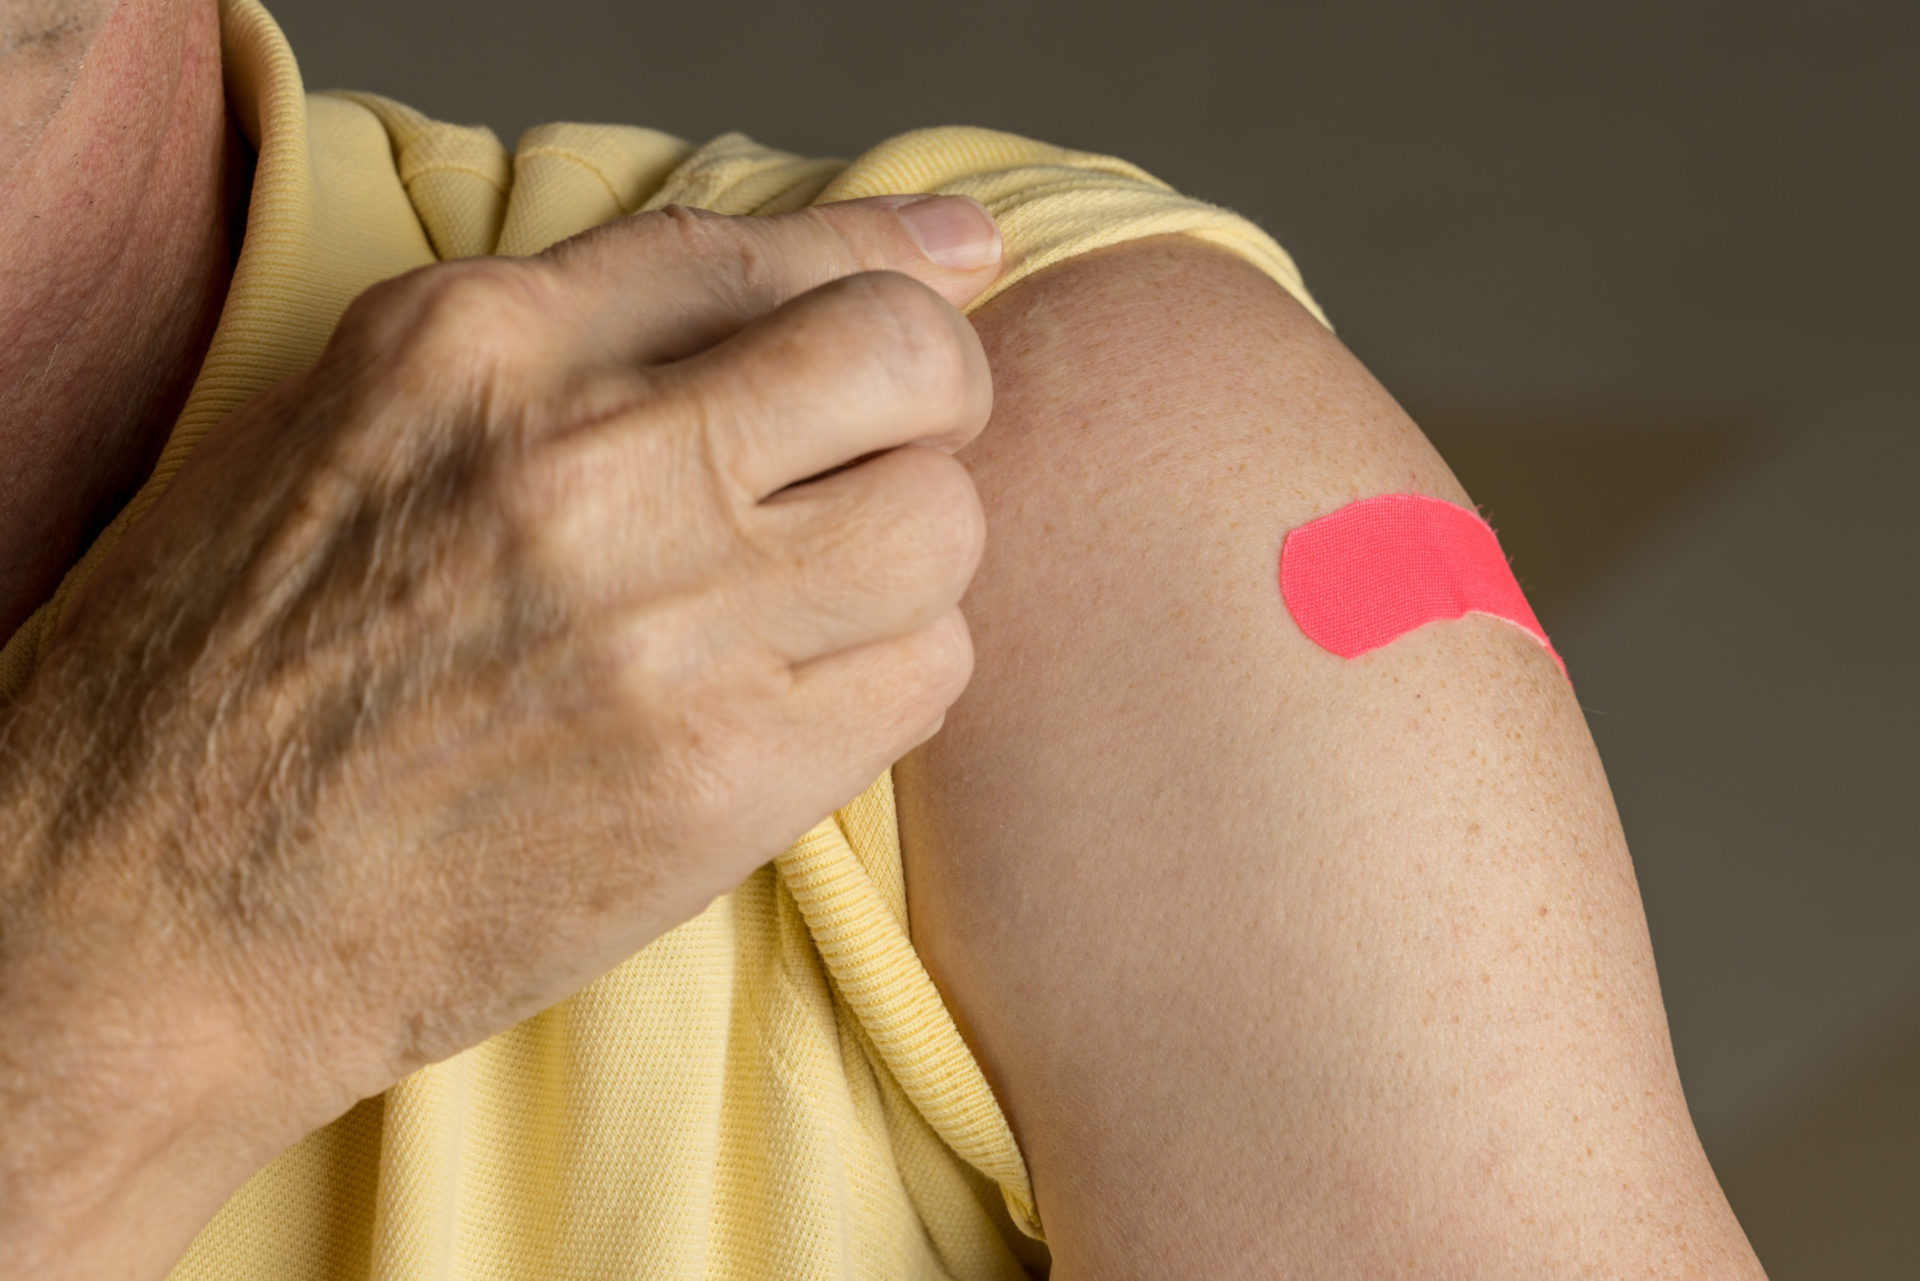 Older Adult Getting Flu Shots during COVID-19 | Our Take by Corporate Synergies